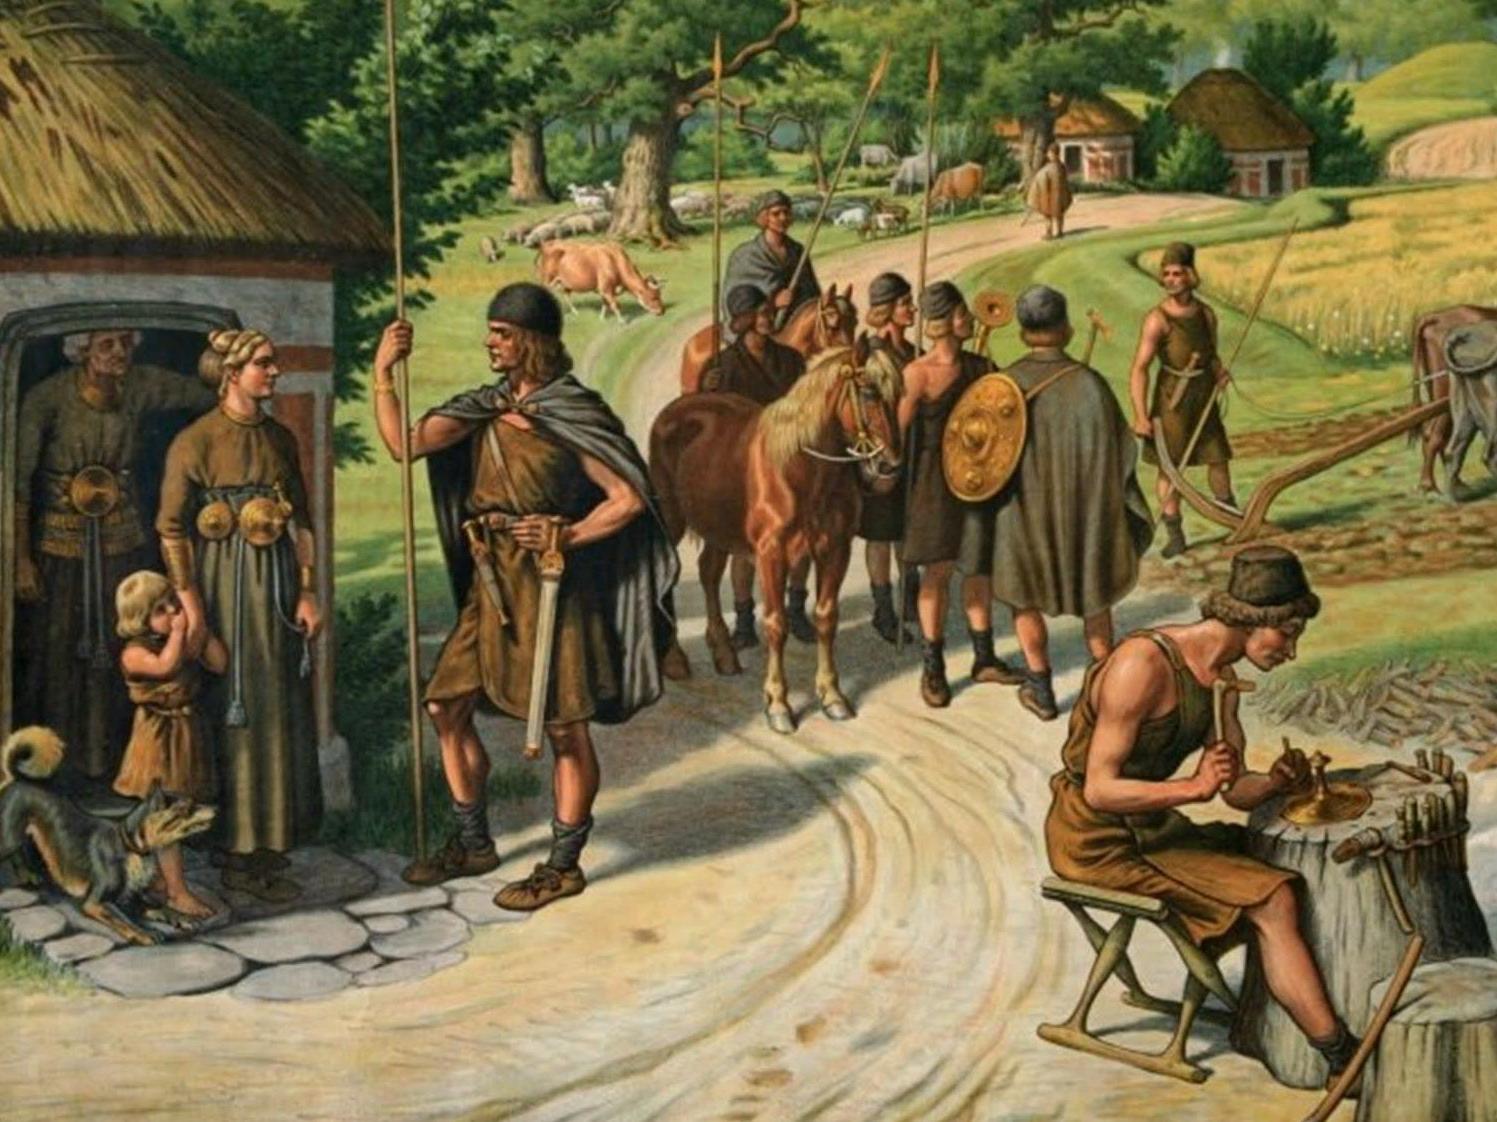 Bronze Age inequality and family life revealed in powerful study